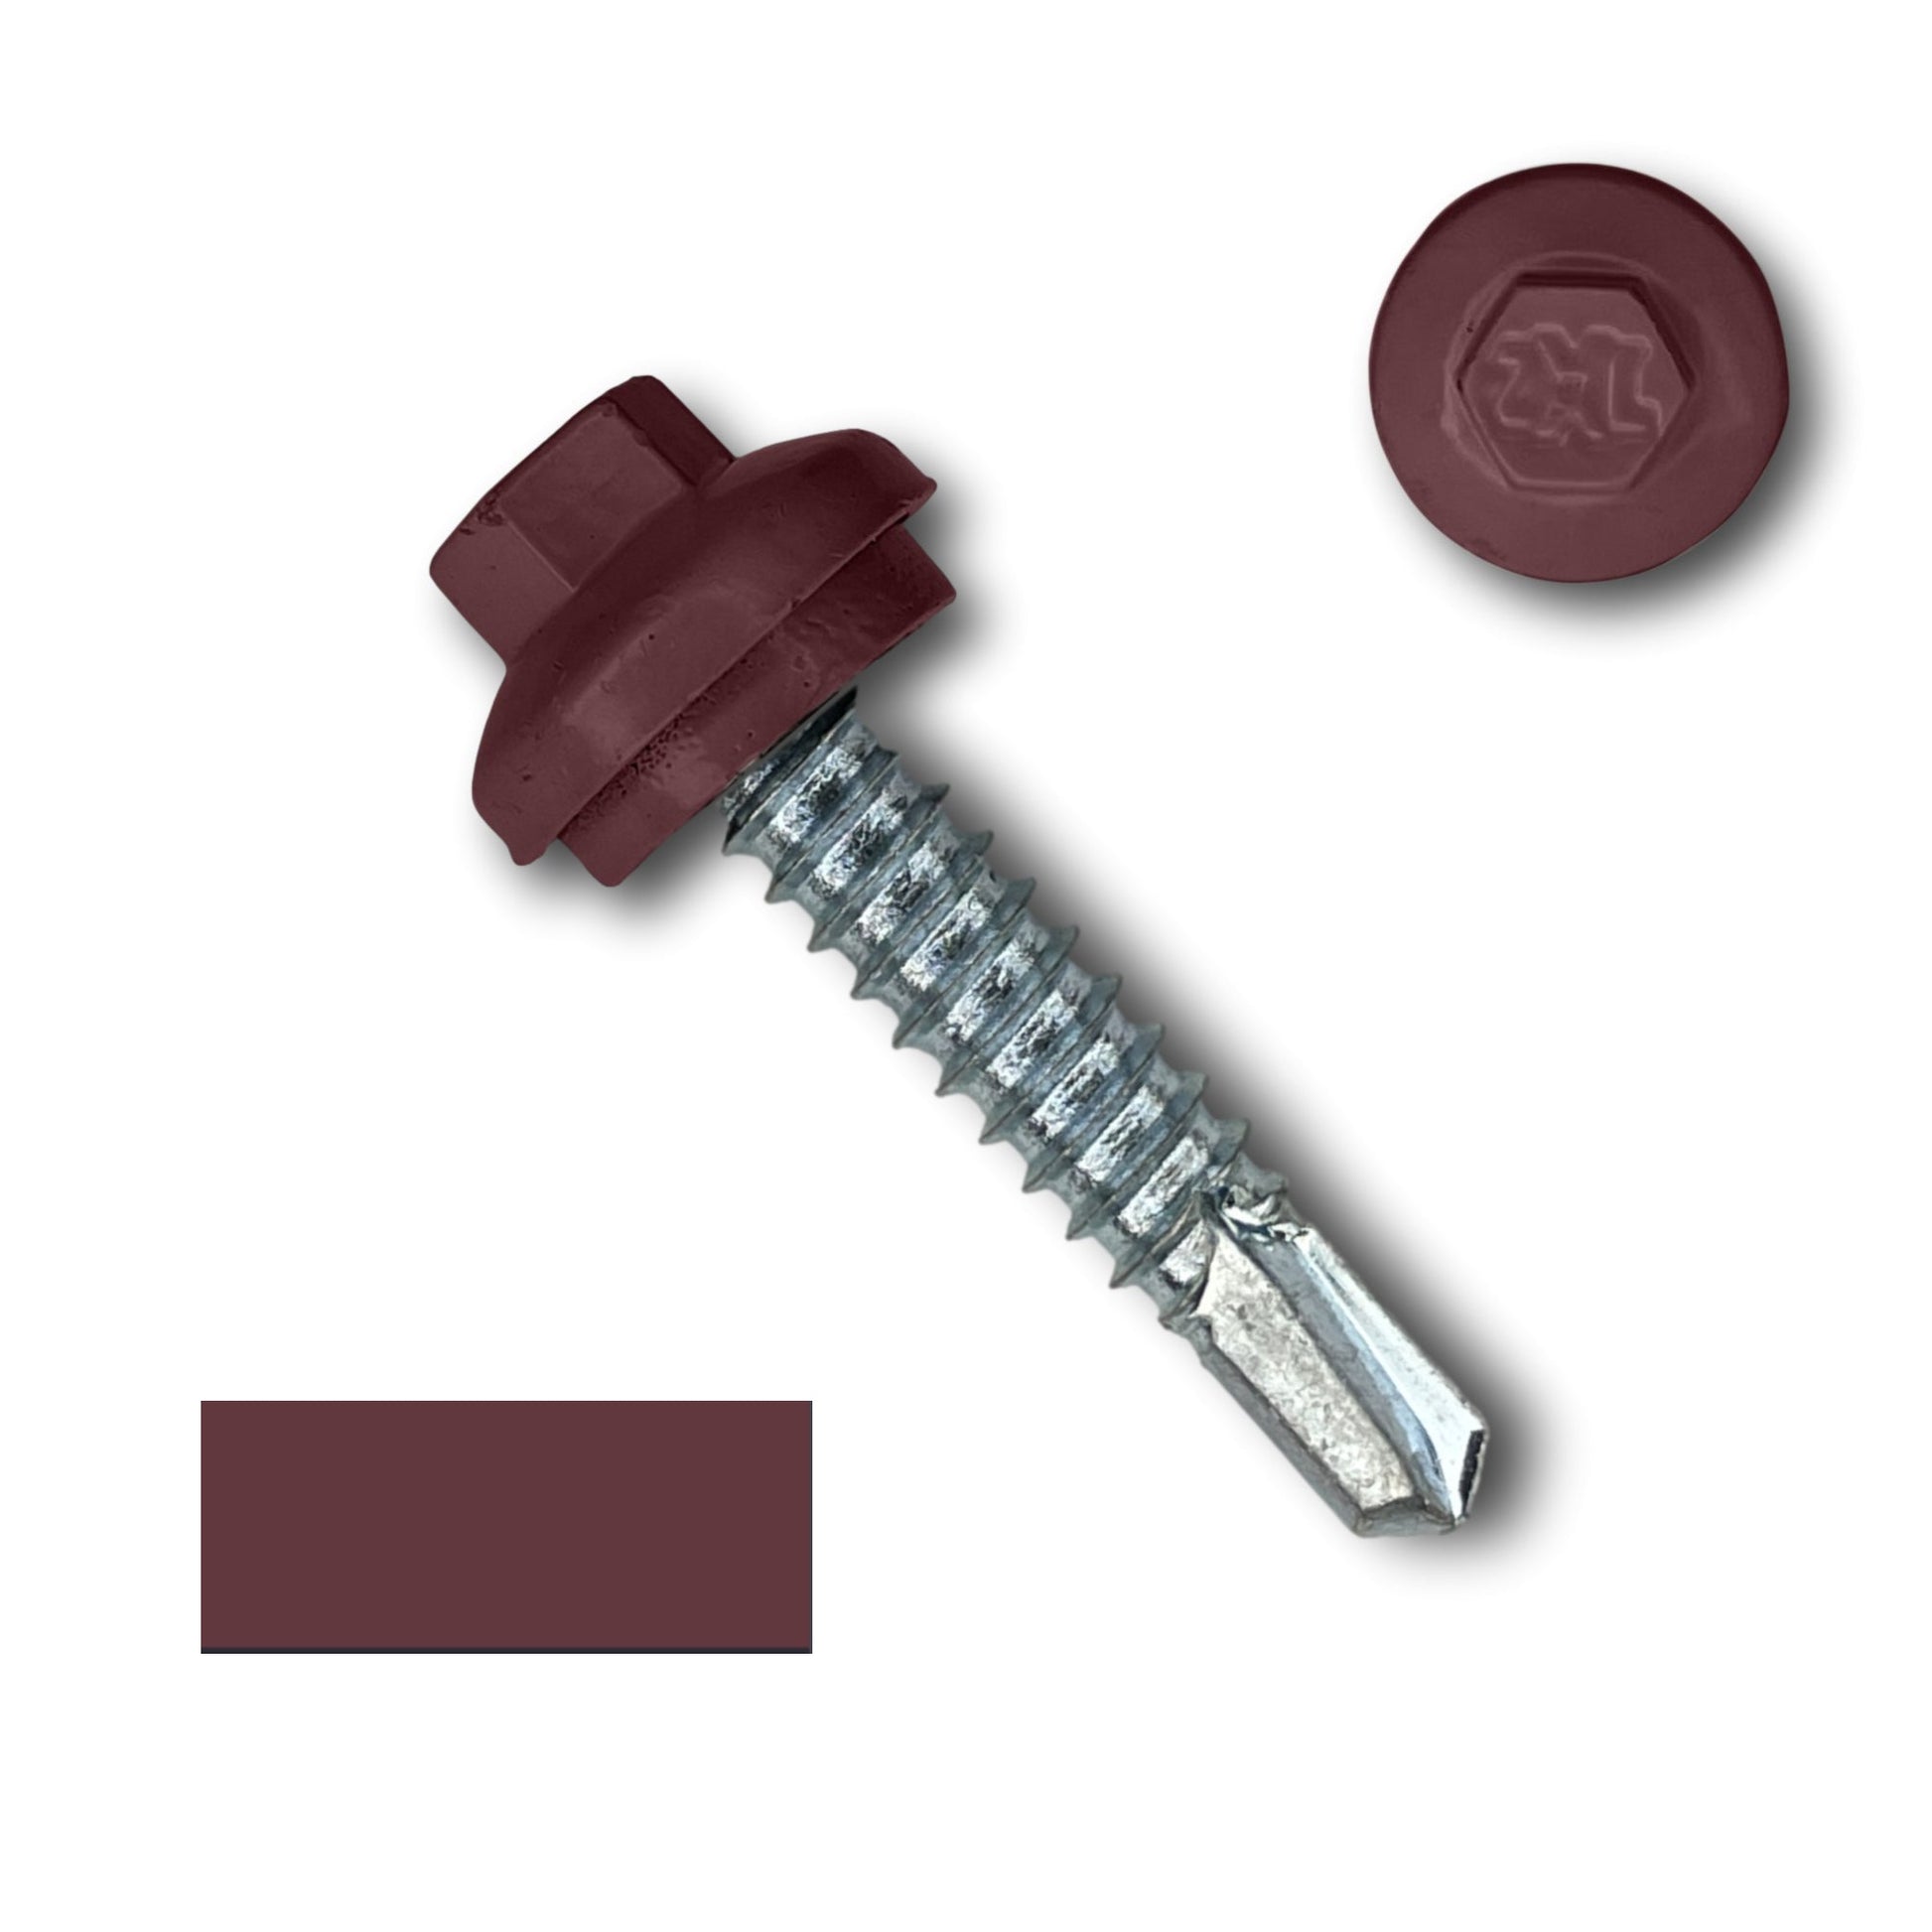 A #14 x 1.25" ZXL Dome Cap Metal Building Screw (Metal-to-Metal), Self-Drilling - 250, 500, or 1000 Pack by Perma Cover with a burgundy-colored painted head. The image shows the threaded part and the sharp drill point. Additionally, a close-up of the screw's head, along with a color swatch matching it, is displayed. Ideal metal building screws for durability and precision.